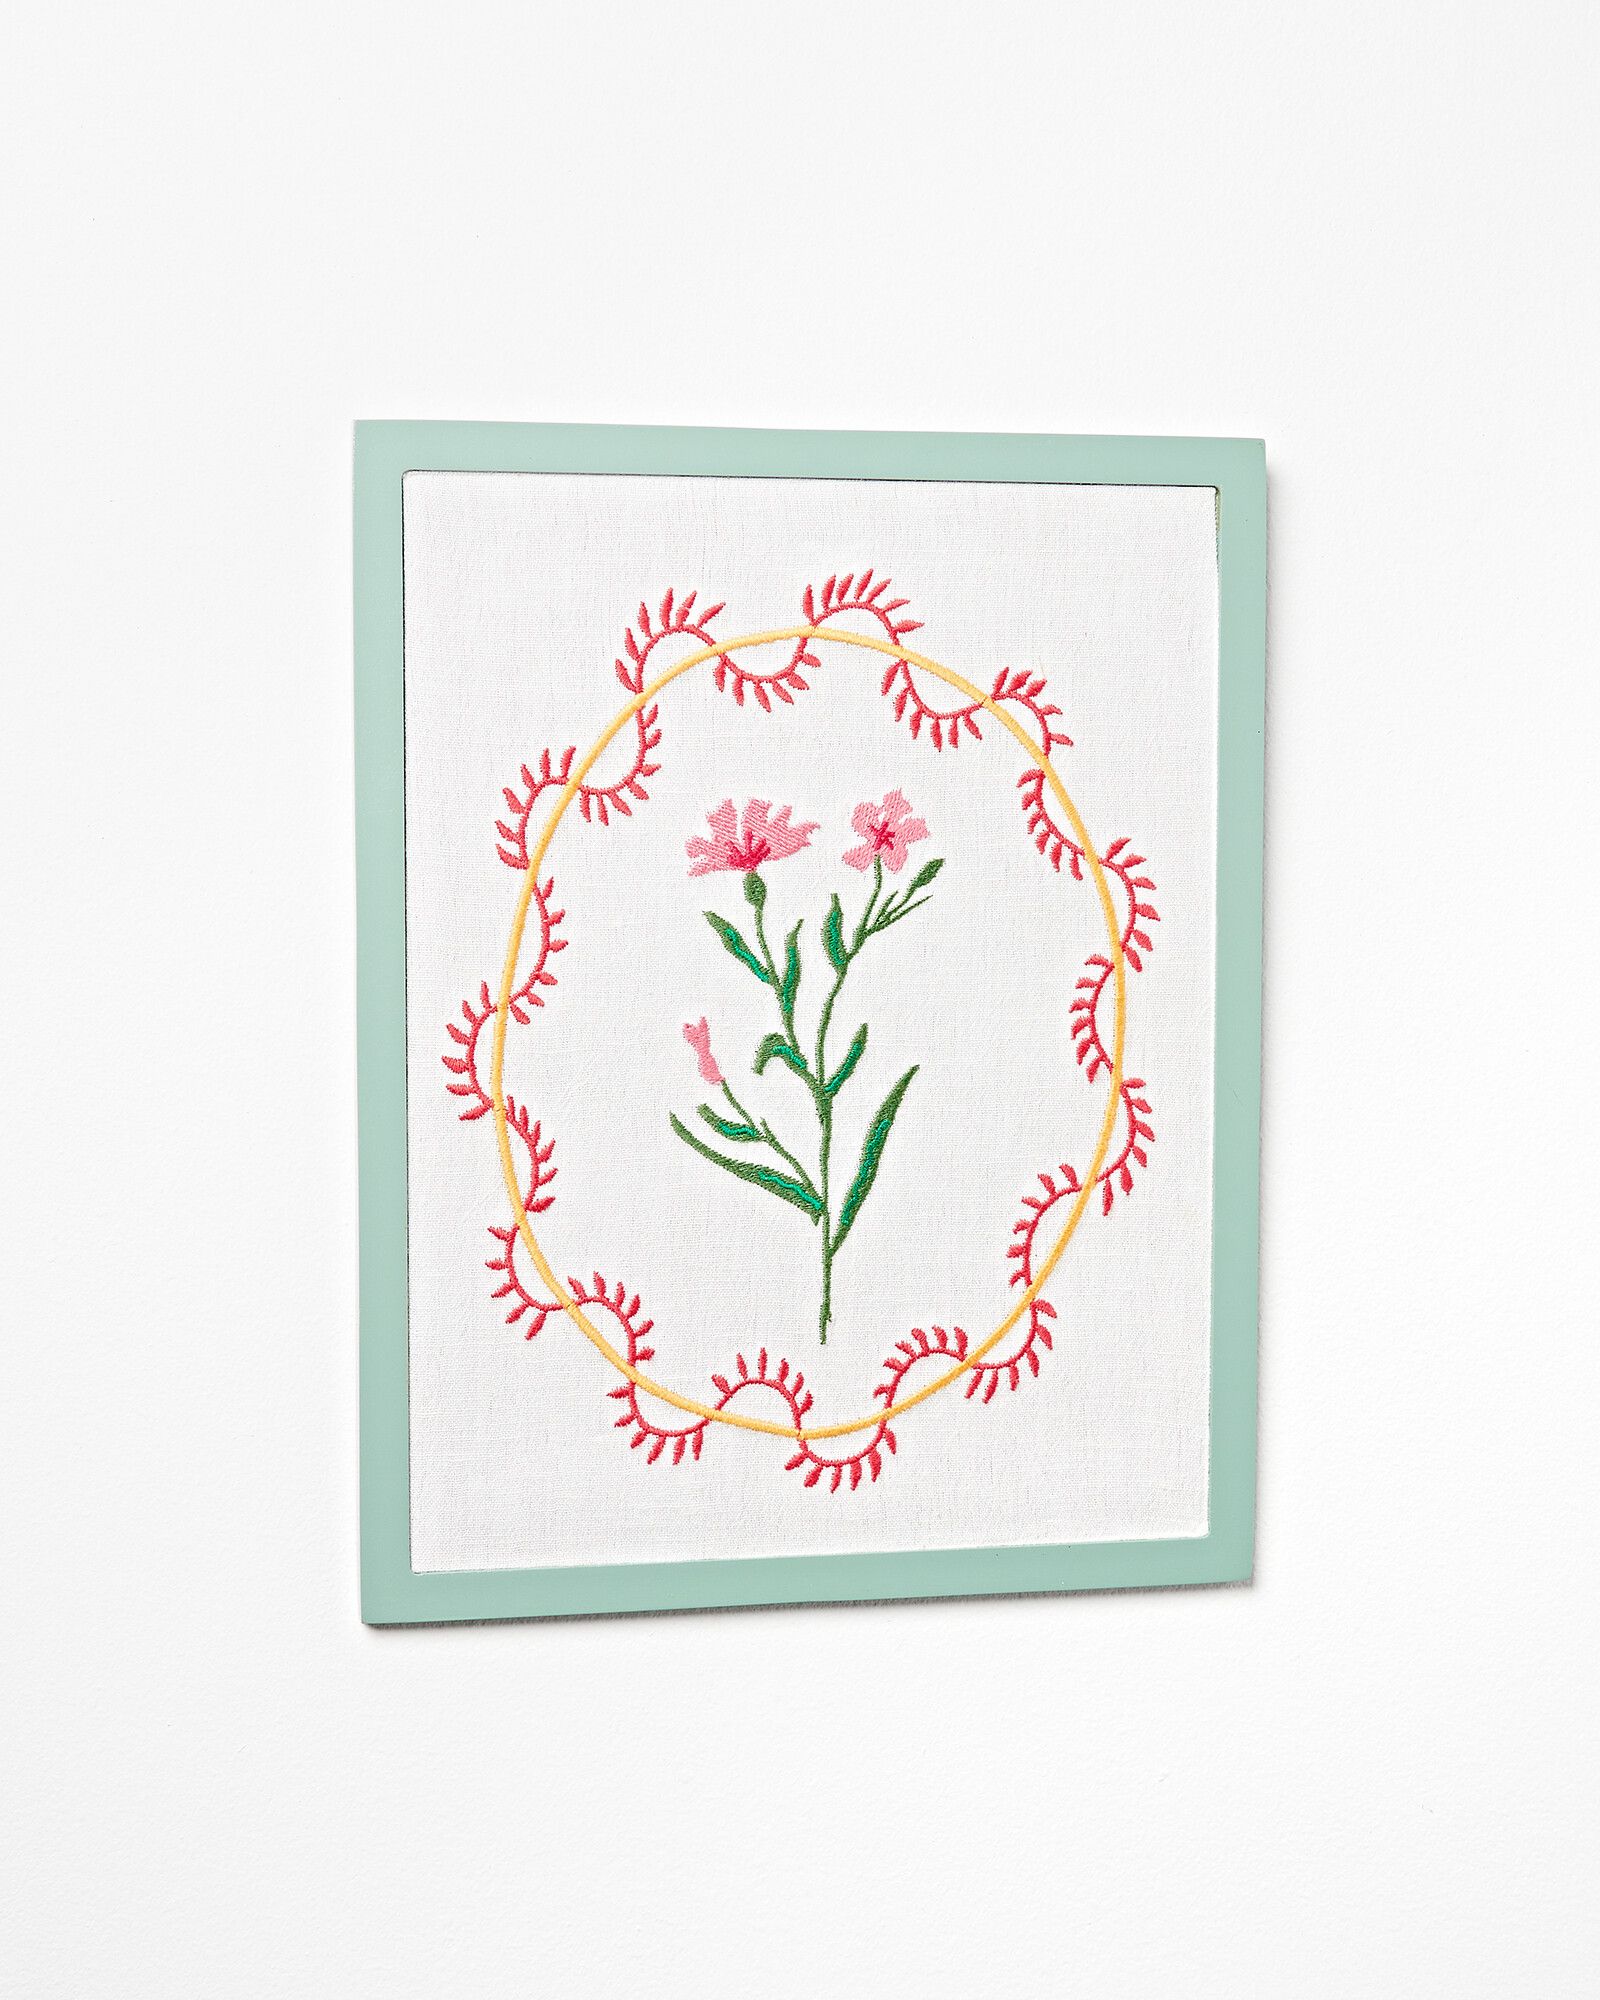 Embroidered Floral Wall Art | Oliver Bonas